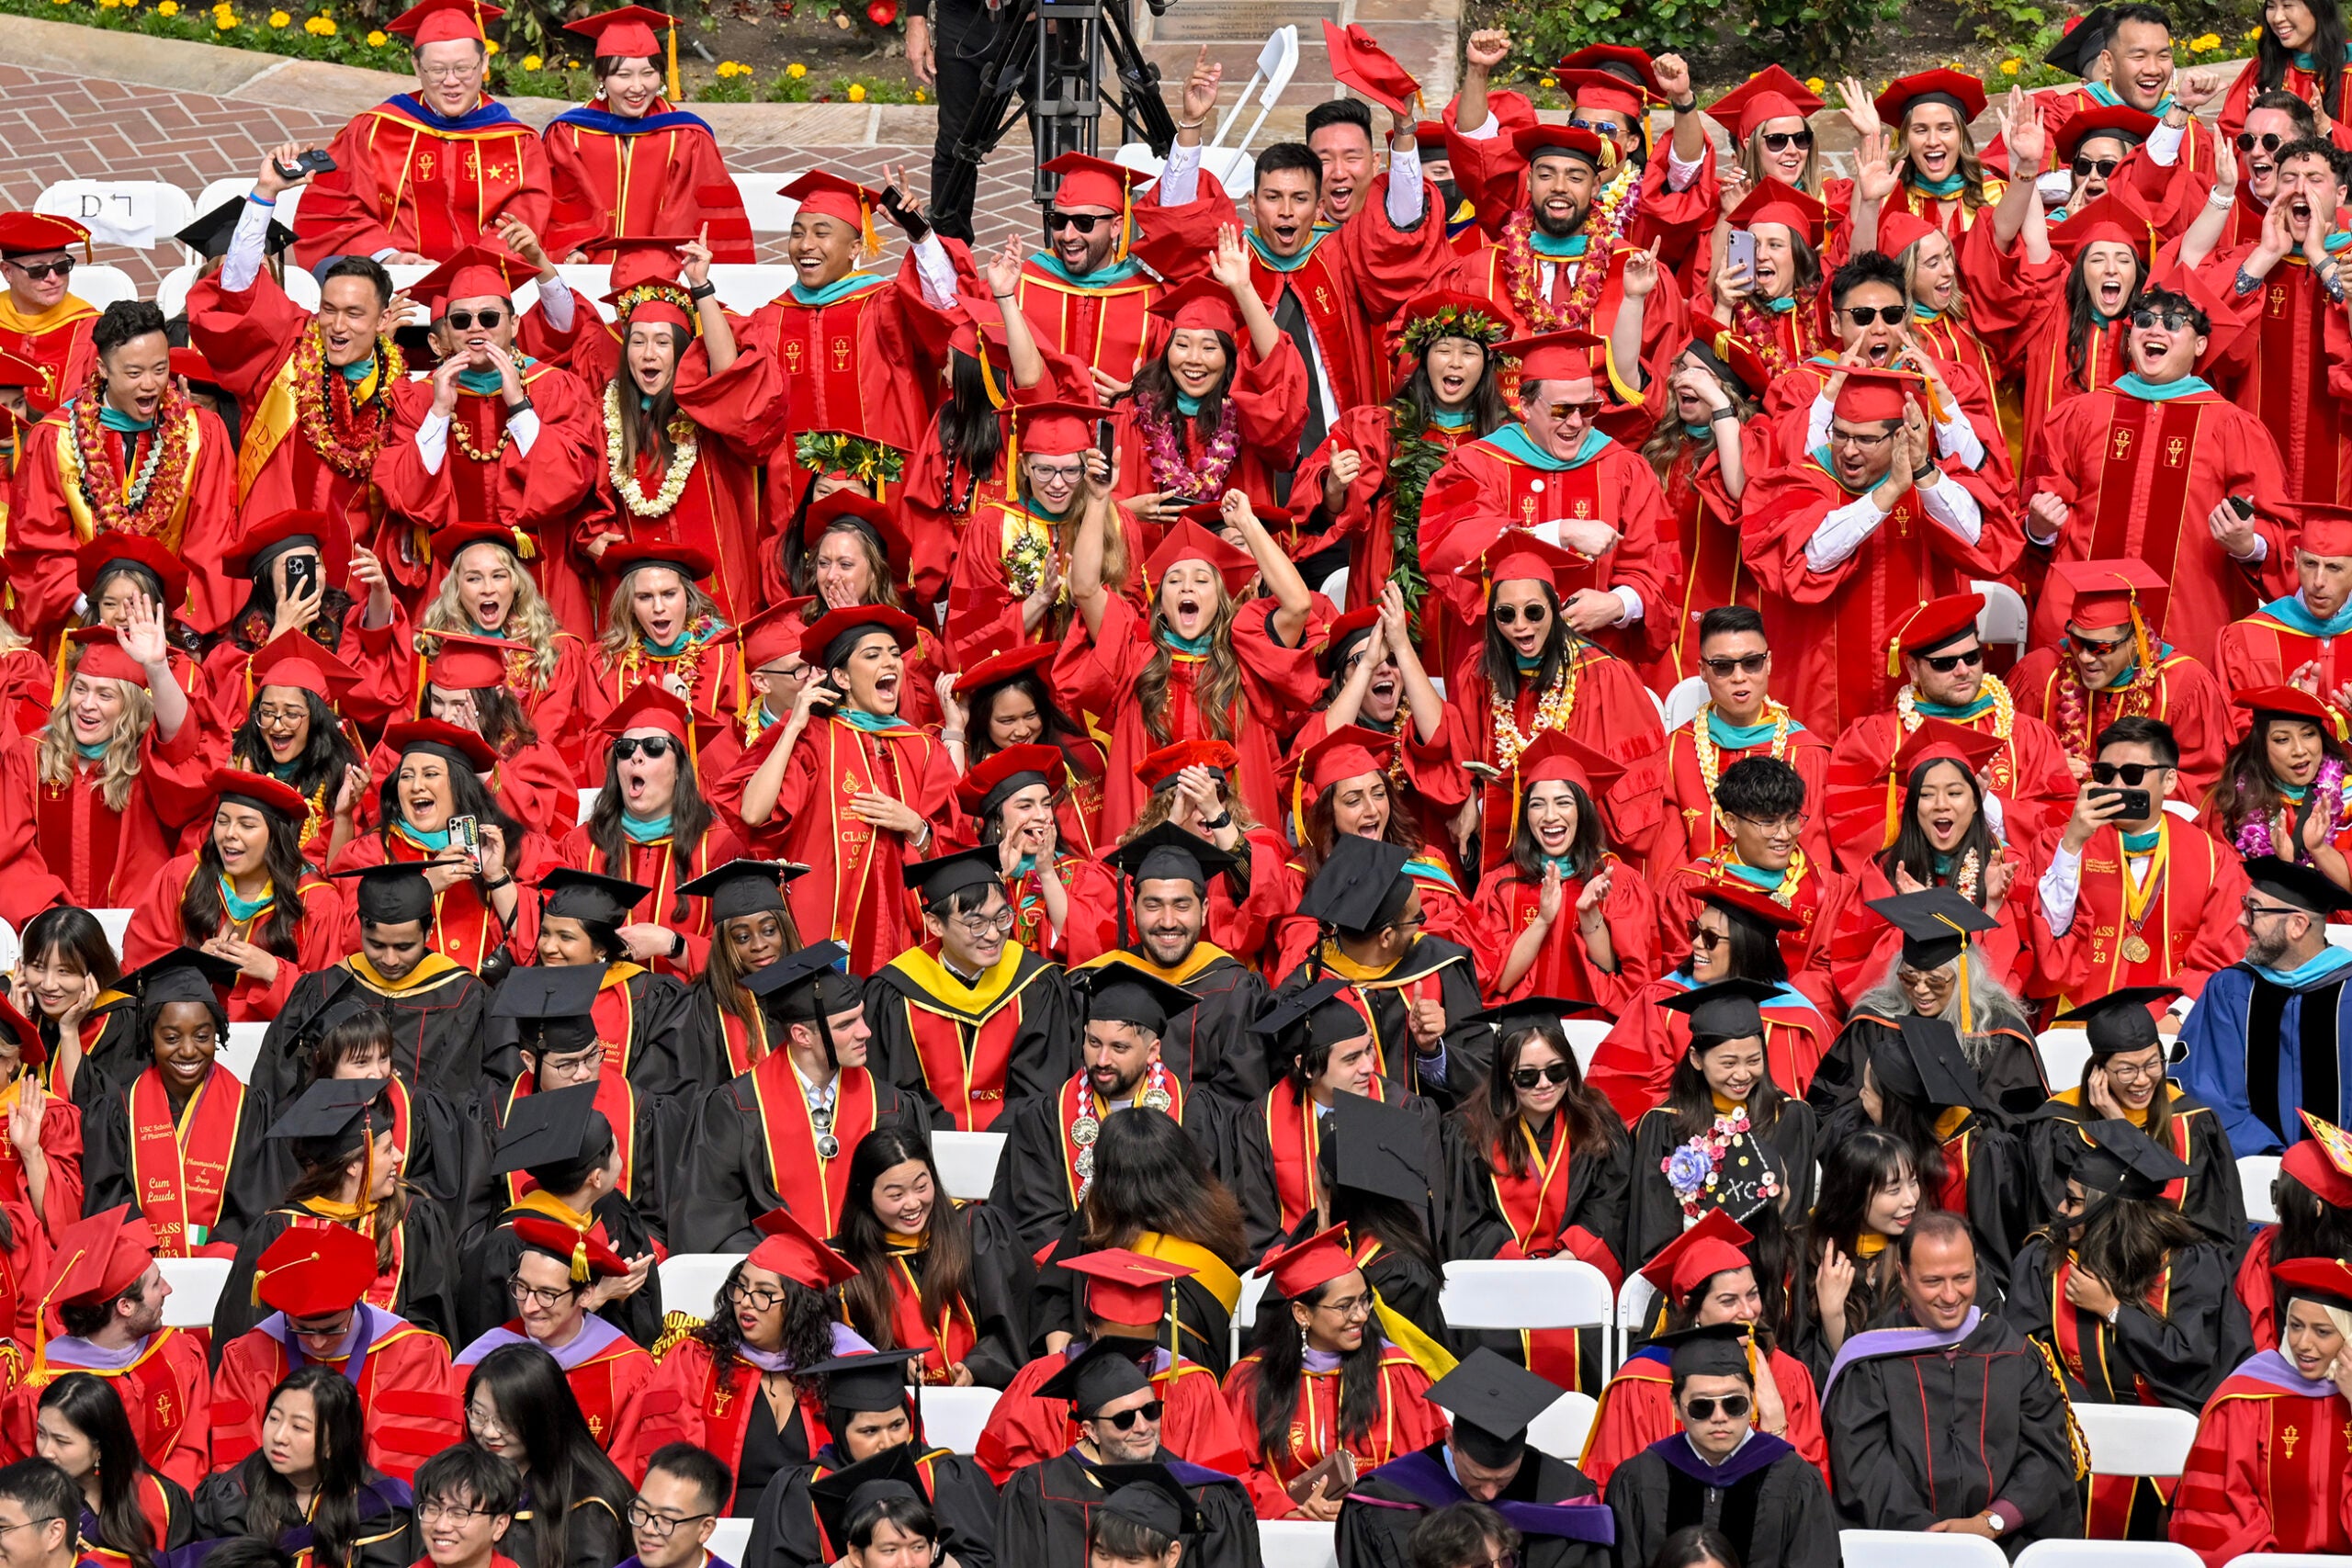 Doctoral graduates celebrate during the 140th commencement ceremony at the University of Southern California, May 12, 2023. (Photo/Gus Ruelas)